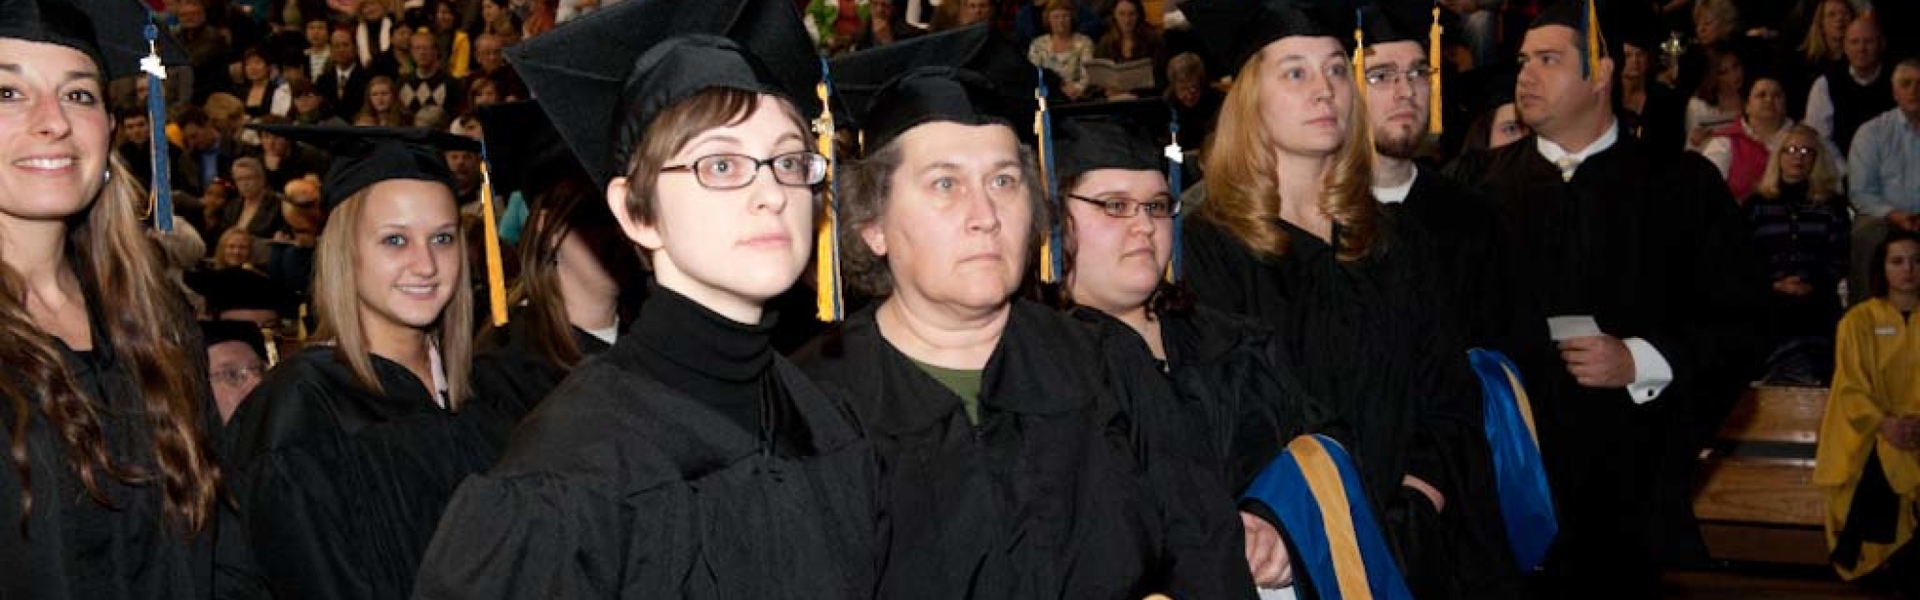 Graduate students at commencement